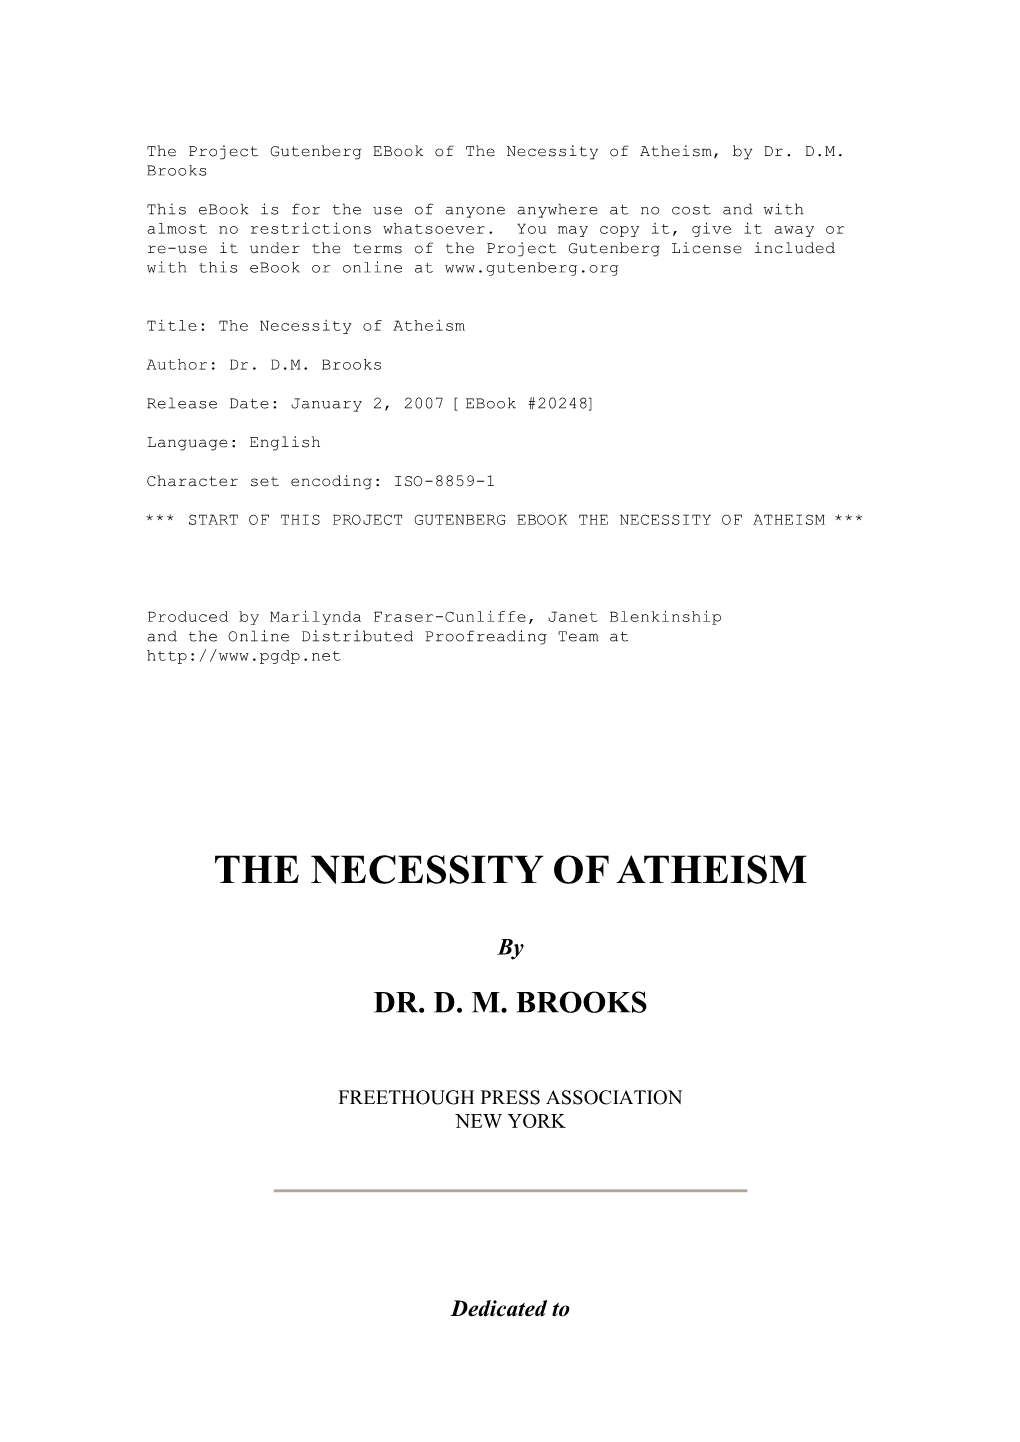 The Necessity of Atheism, by Dr